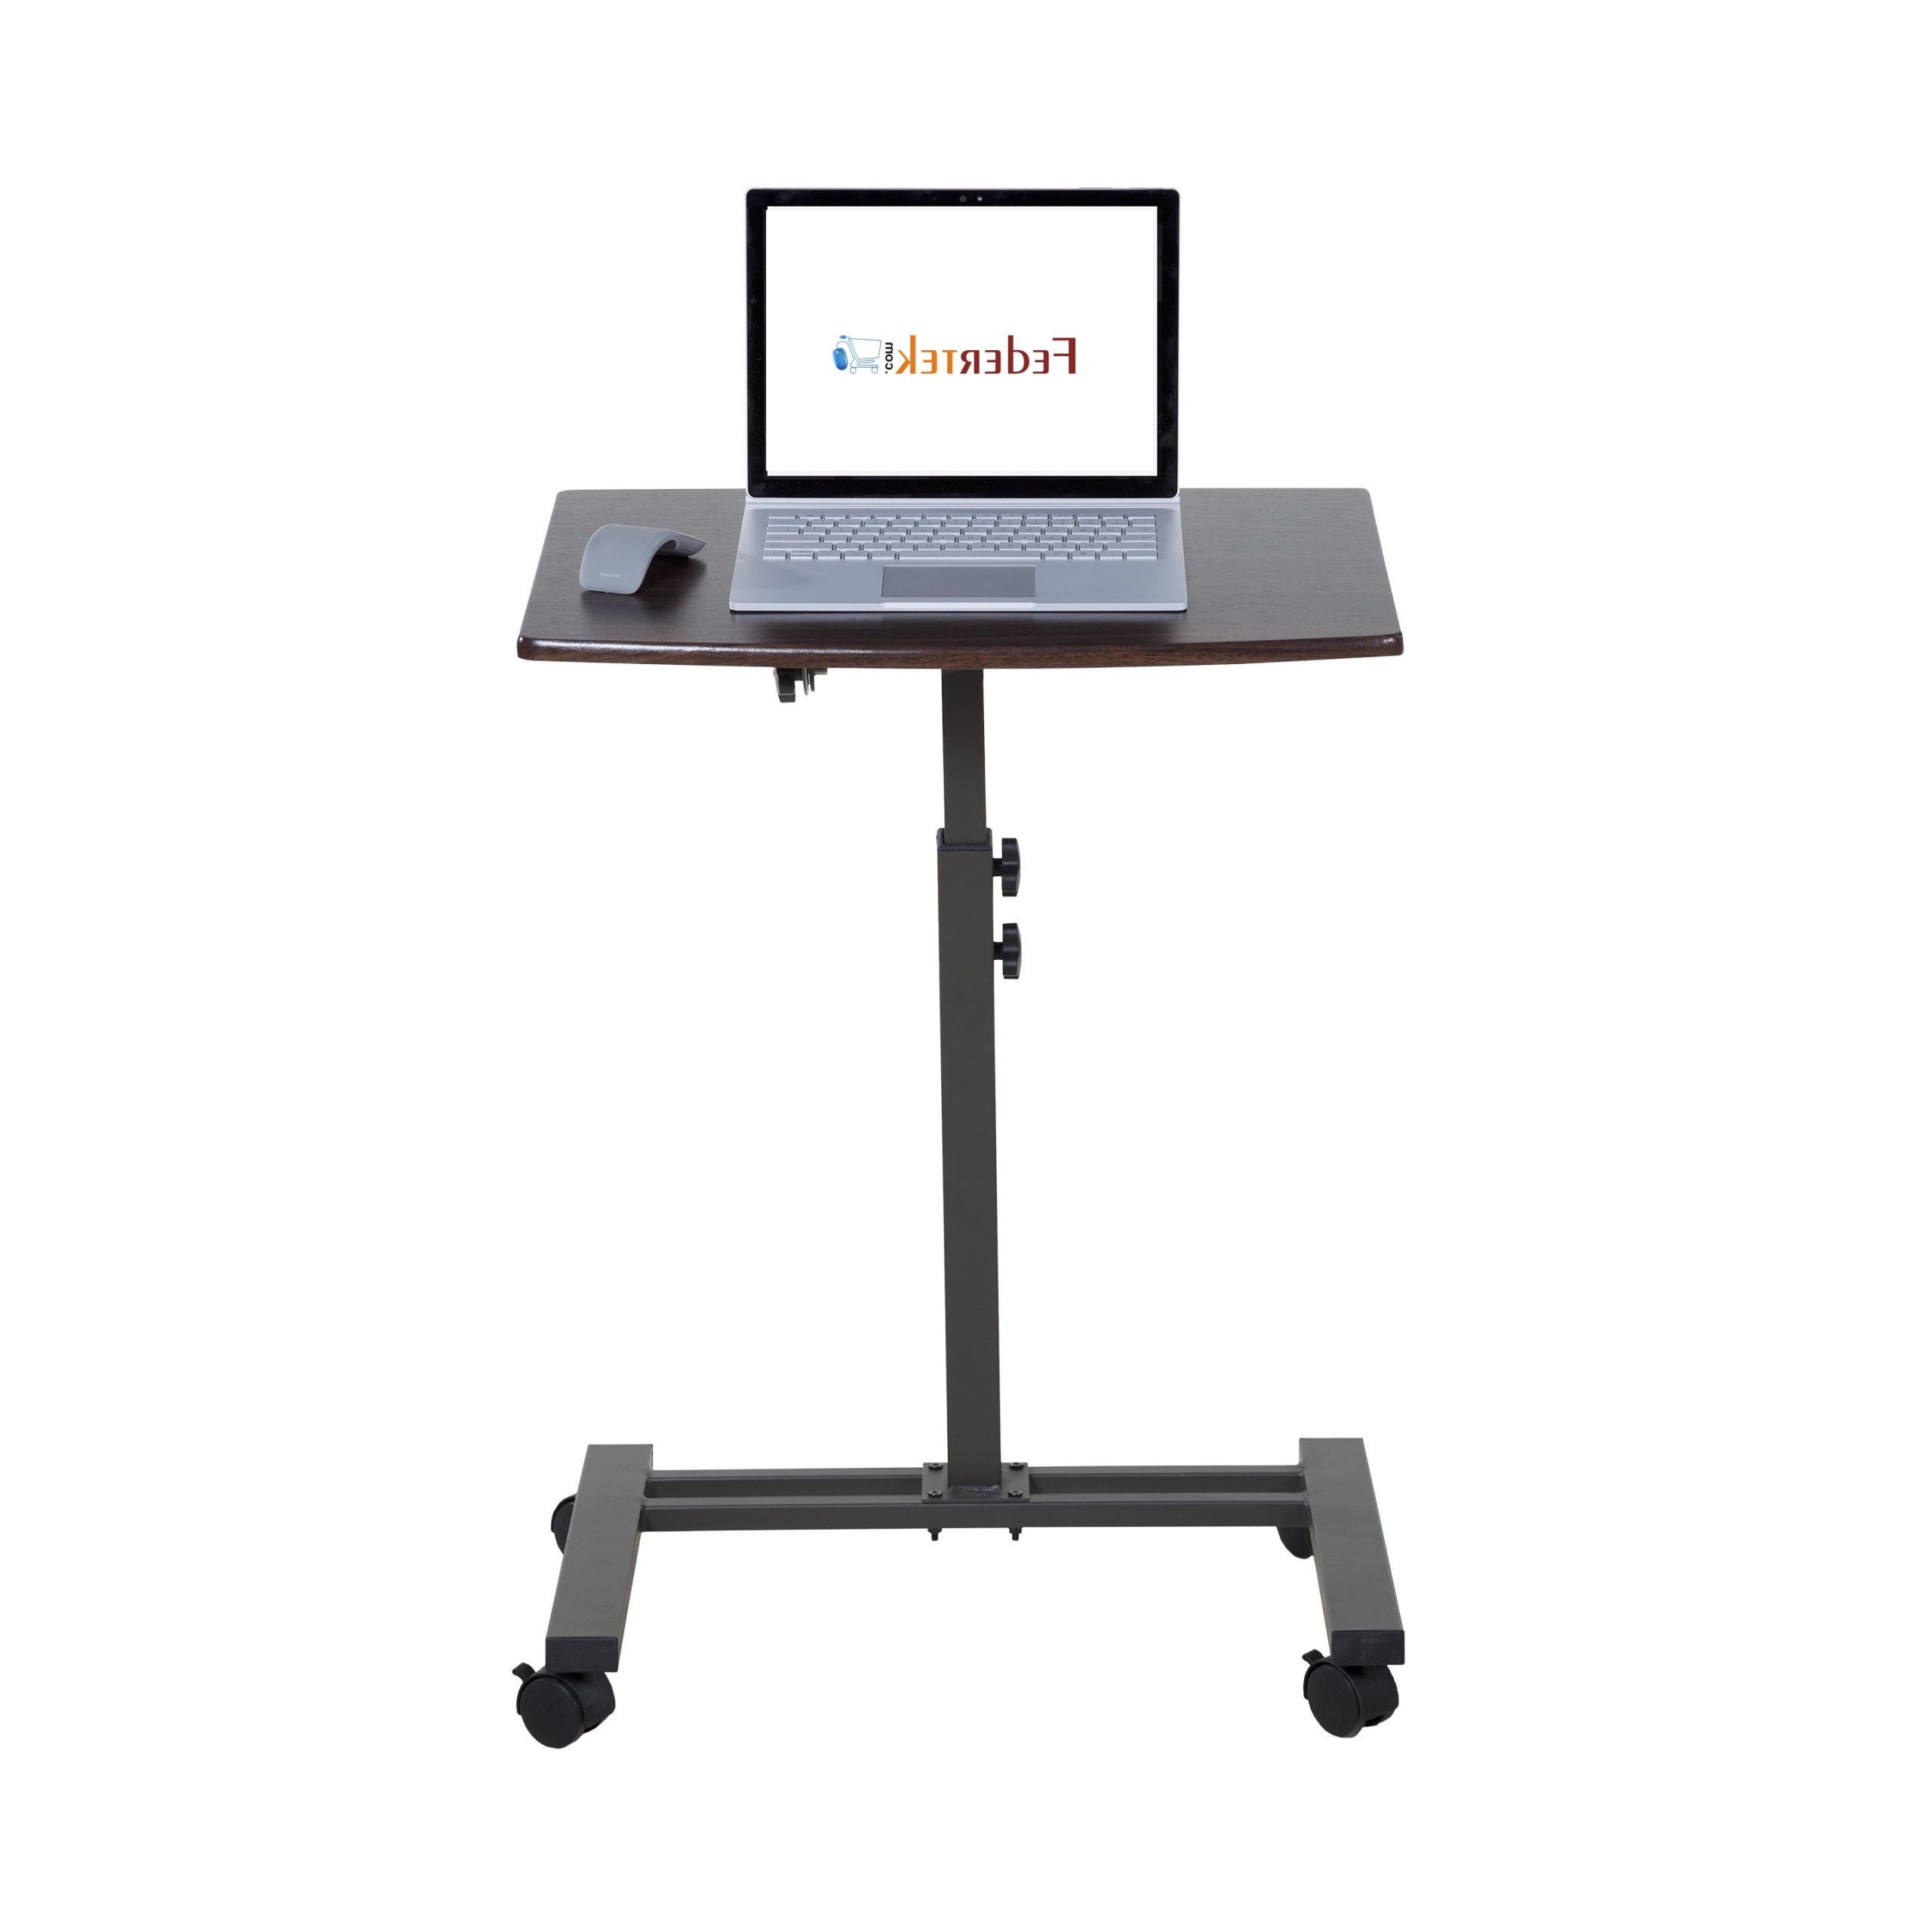 Espresso Adjustable Laptop Desks Intended For Fashionable Buy Height Adjustable Table , Laptop Table, Study Table, Movable Desk (View 3 of 15)